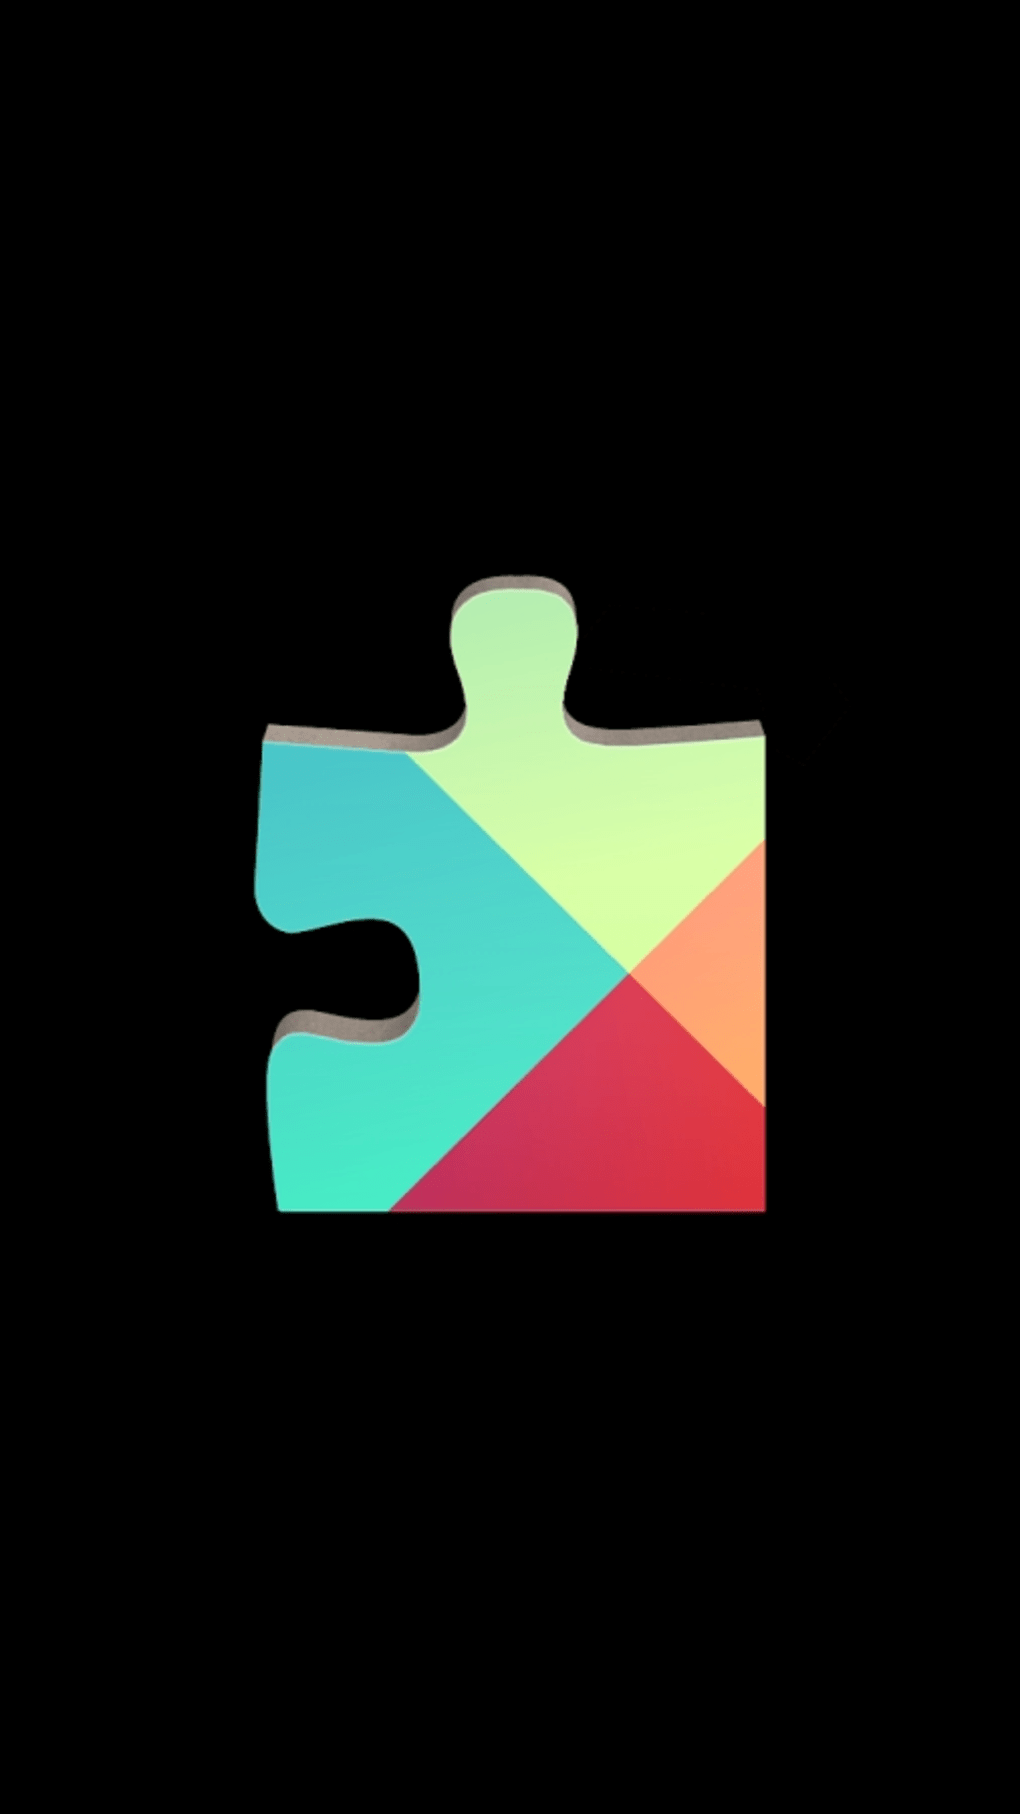 Google play store download app for android